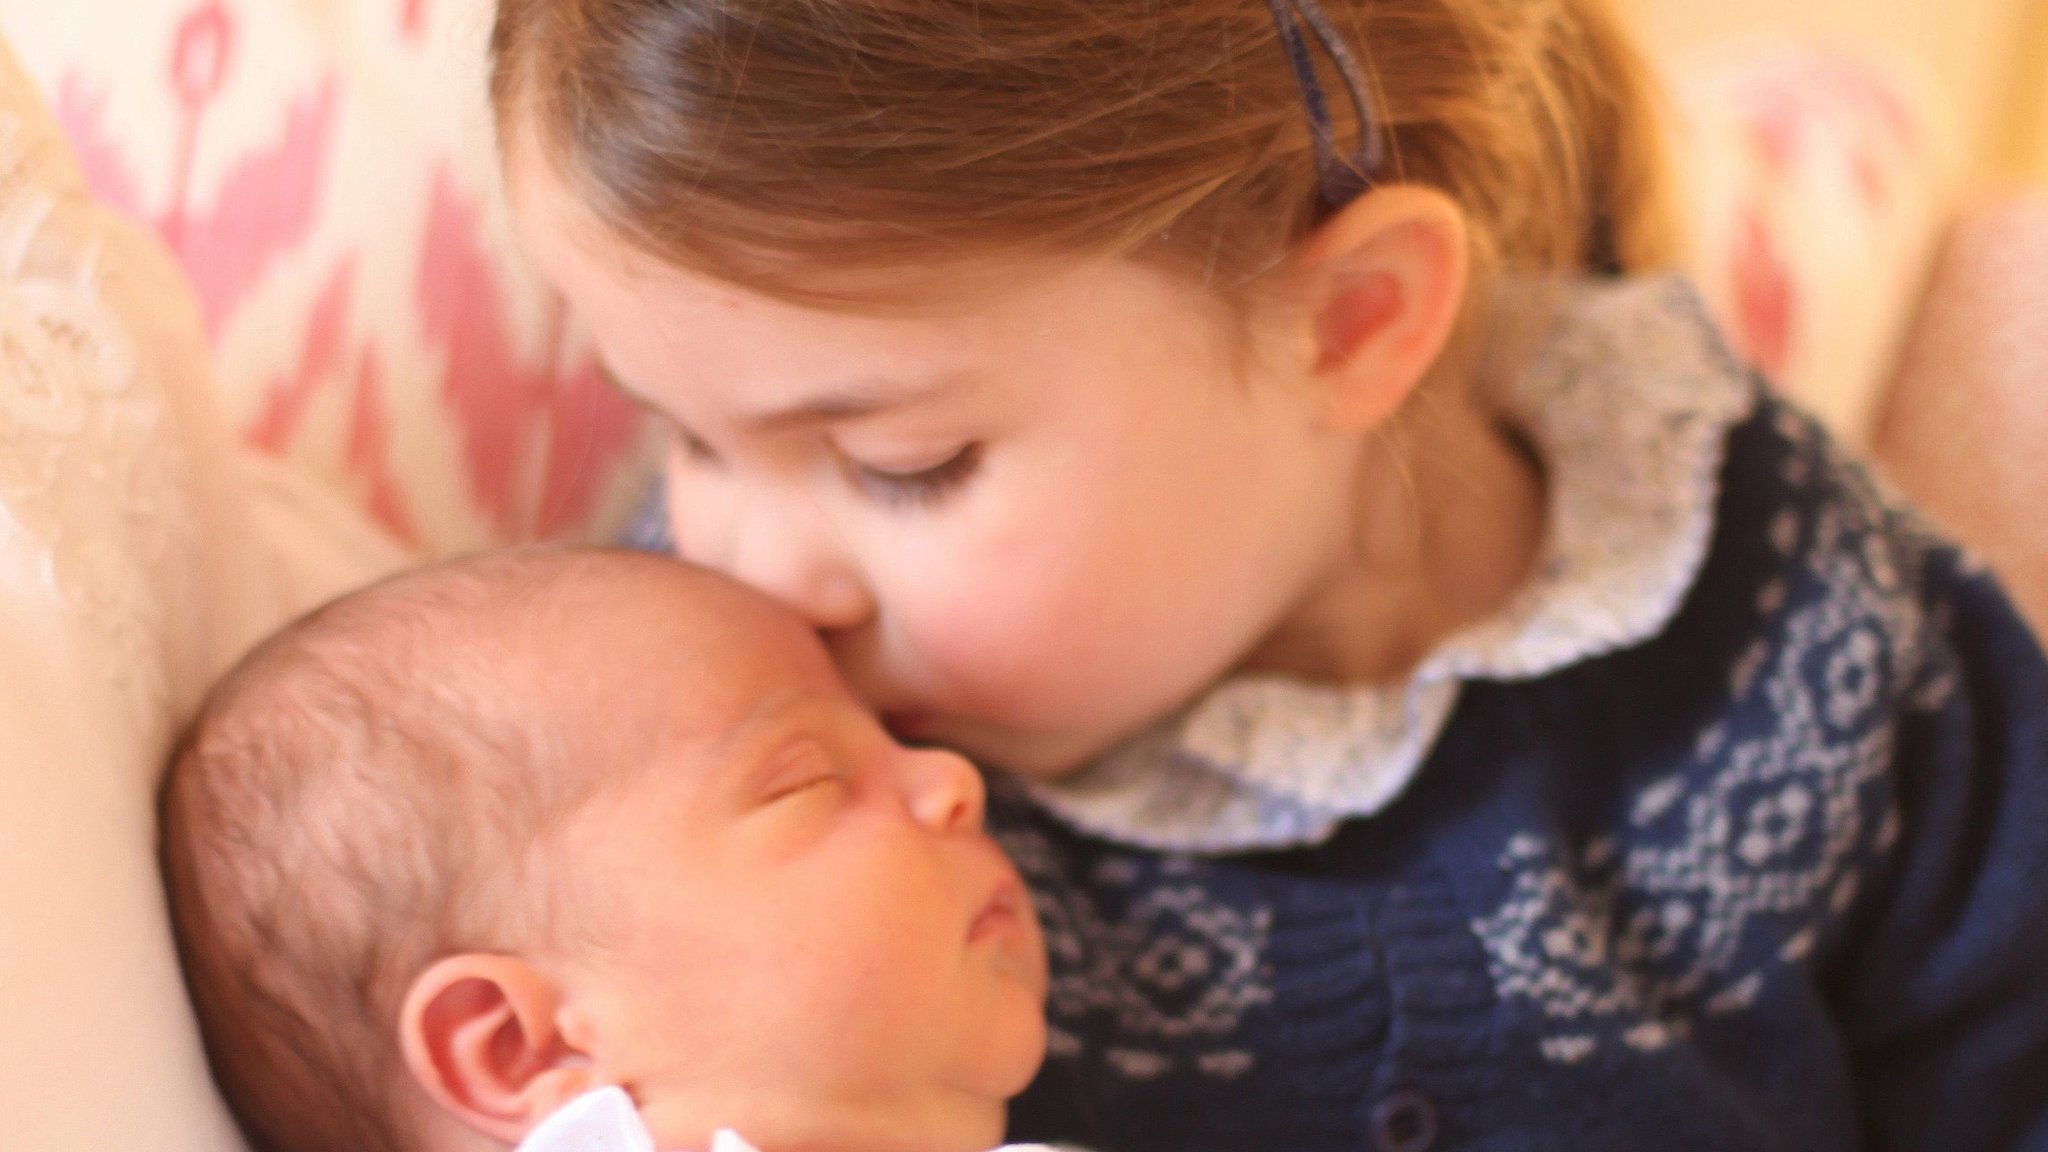 Princess Charlotte is seen with her new brother in the photograph taken on 2 May, 2018 - her third birthday